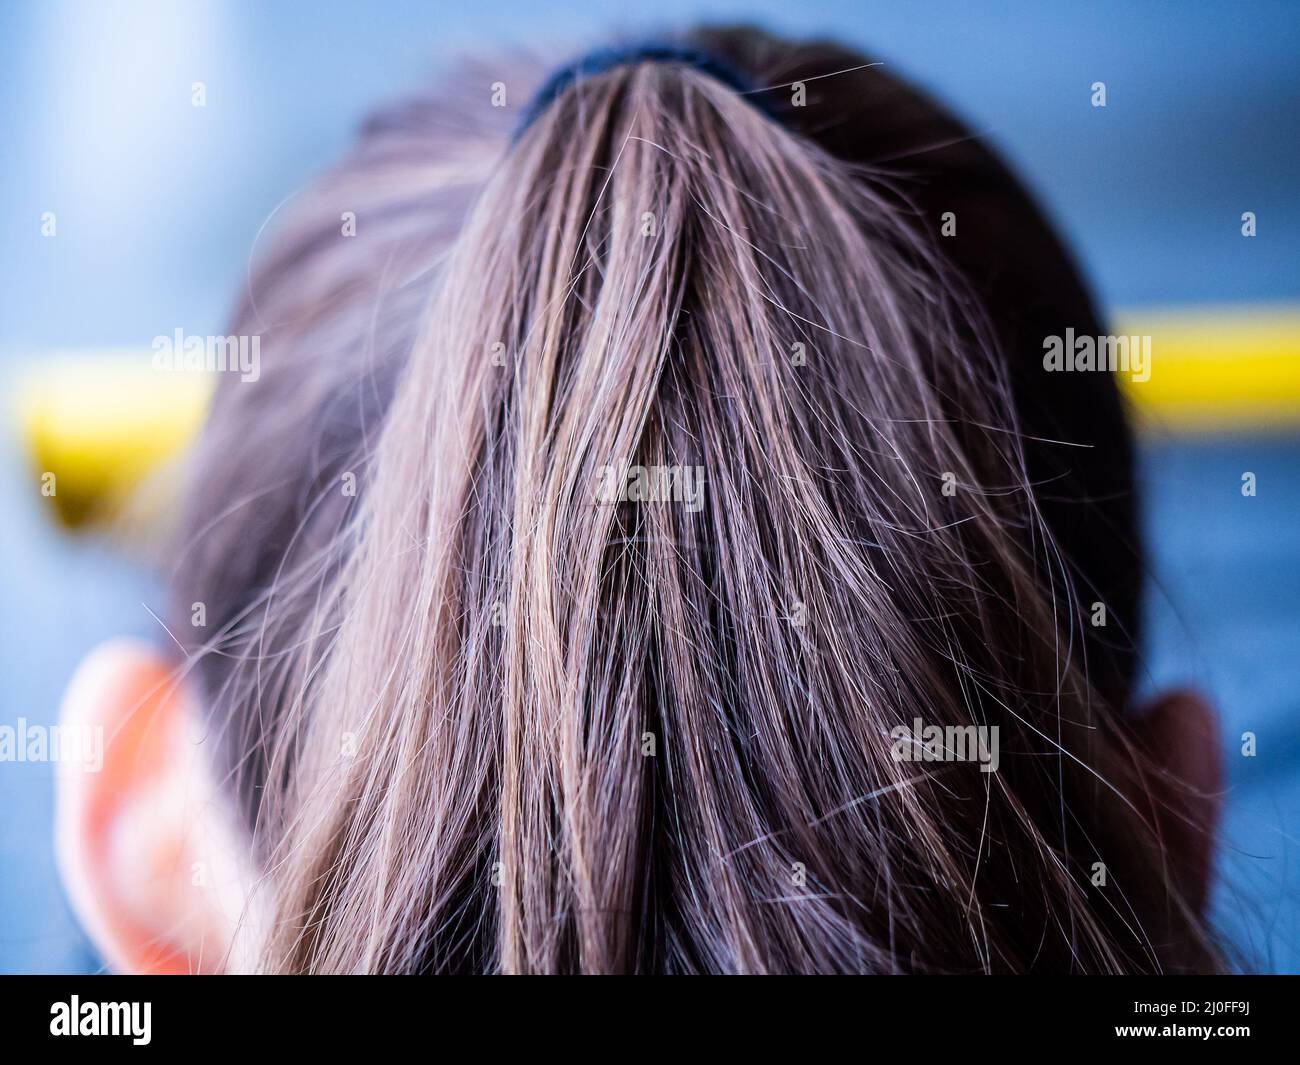 Hair gathered in a ponytail. Fragment of a woman's head, closeup. Focus in the center of the frame Stock Photo